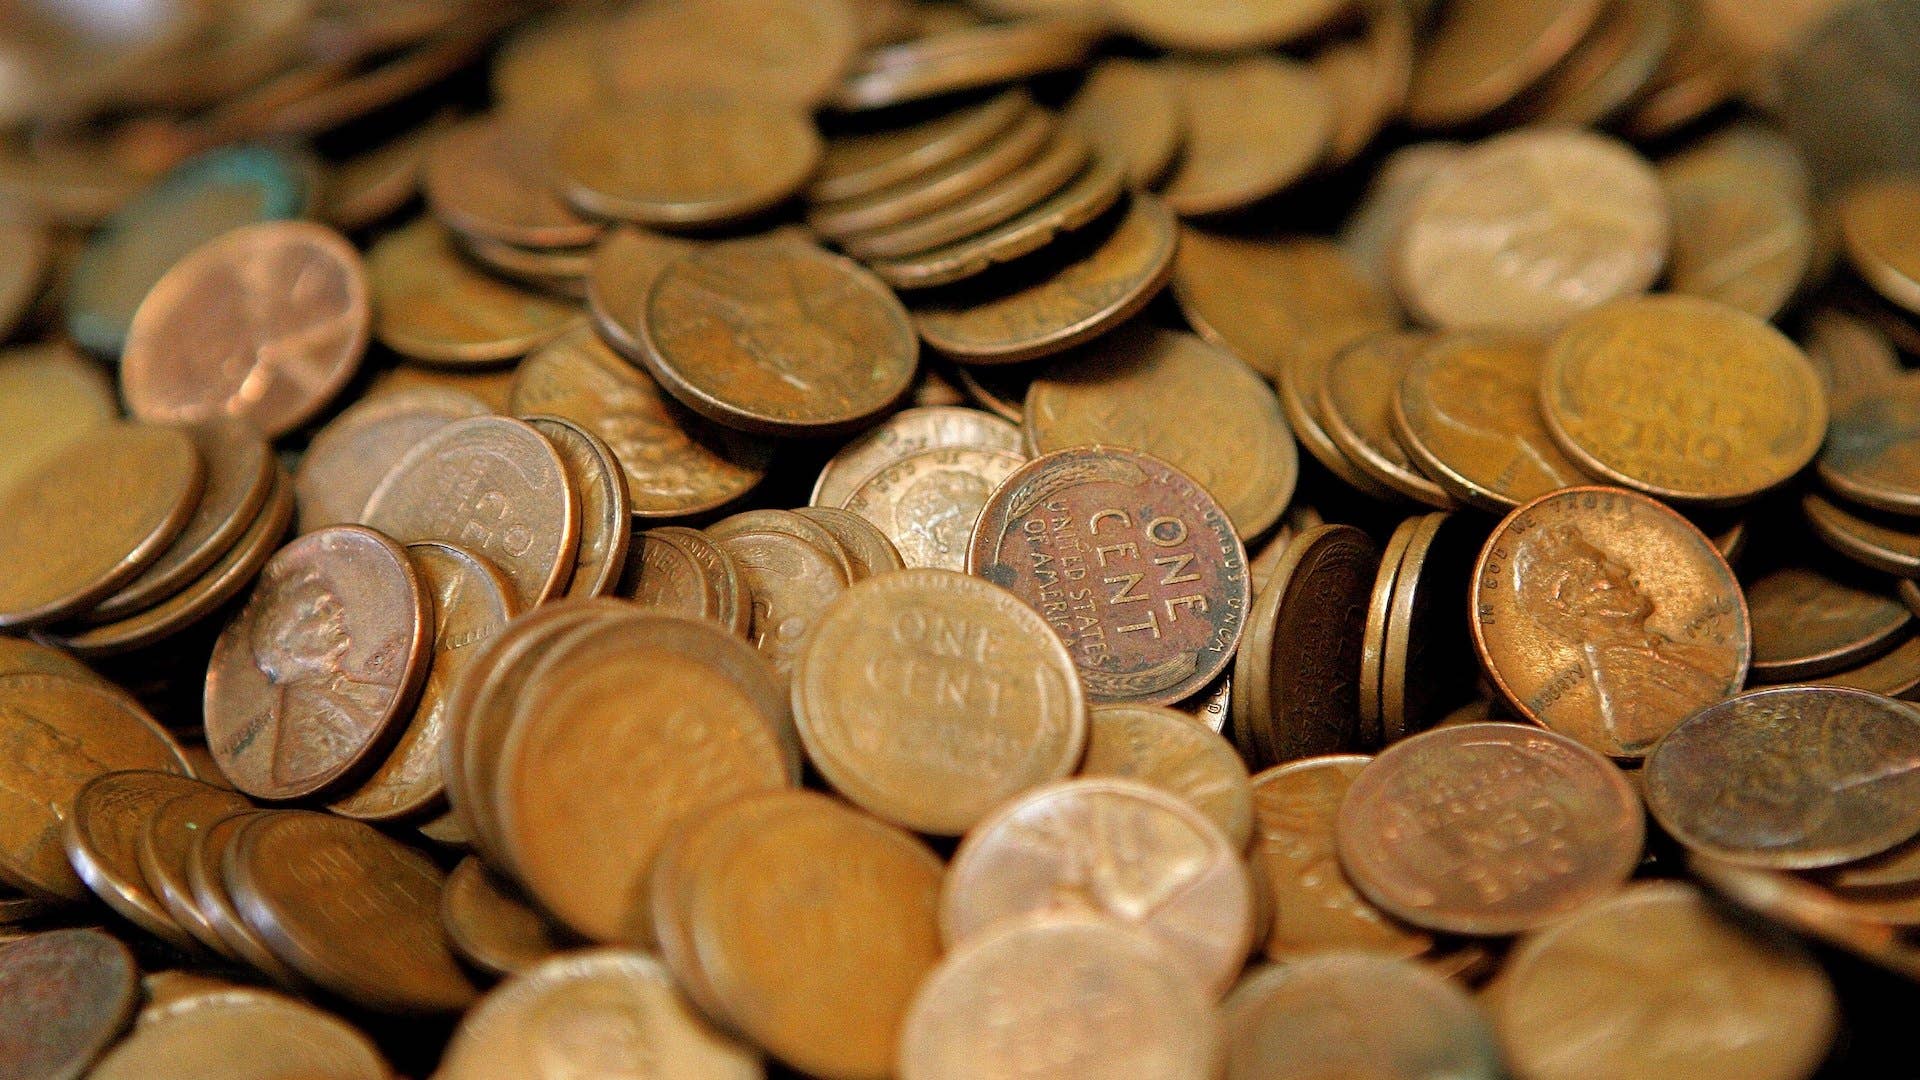 Photograph of a pile of pennies